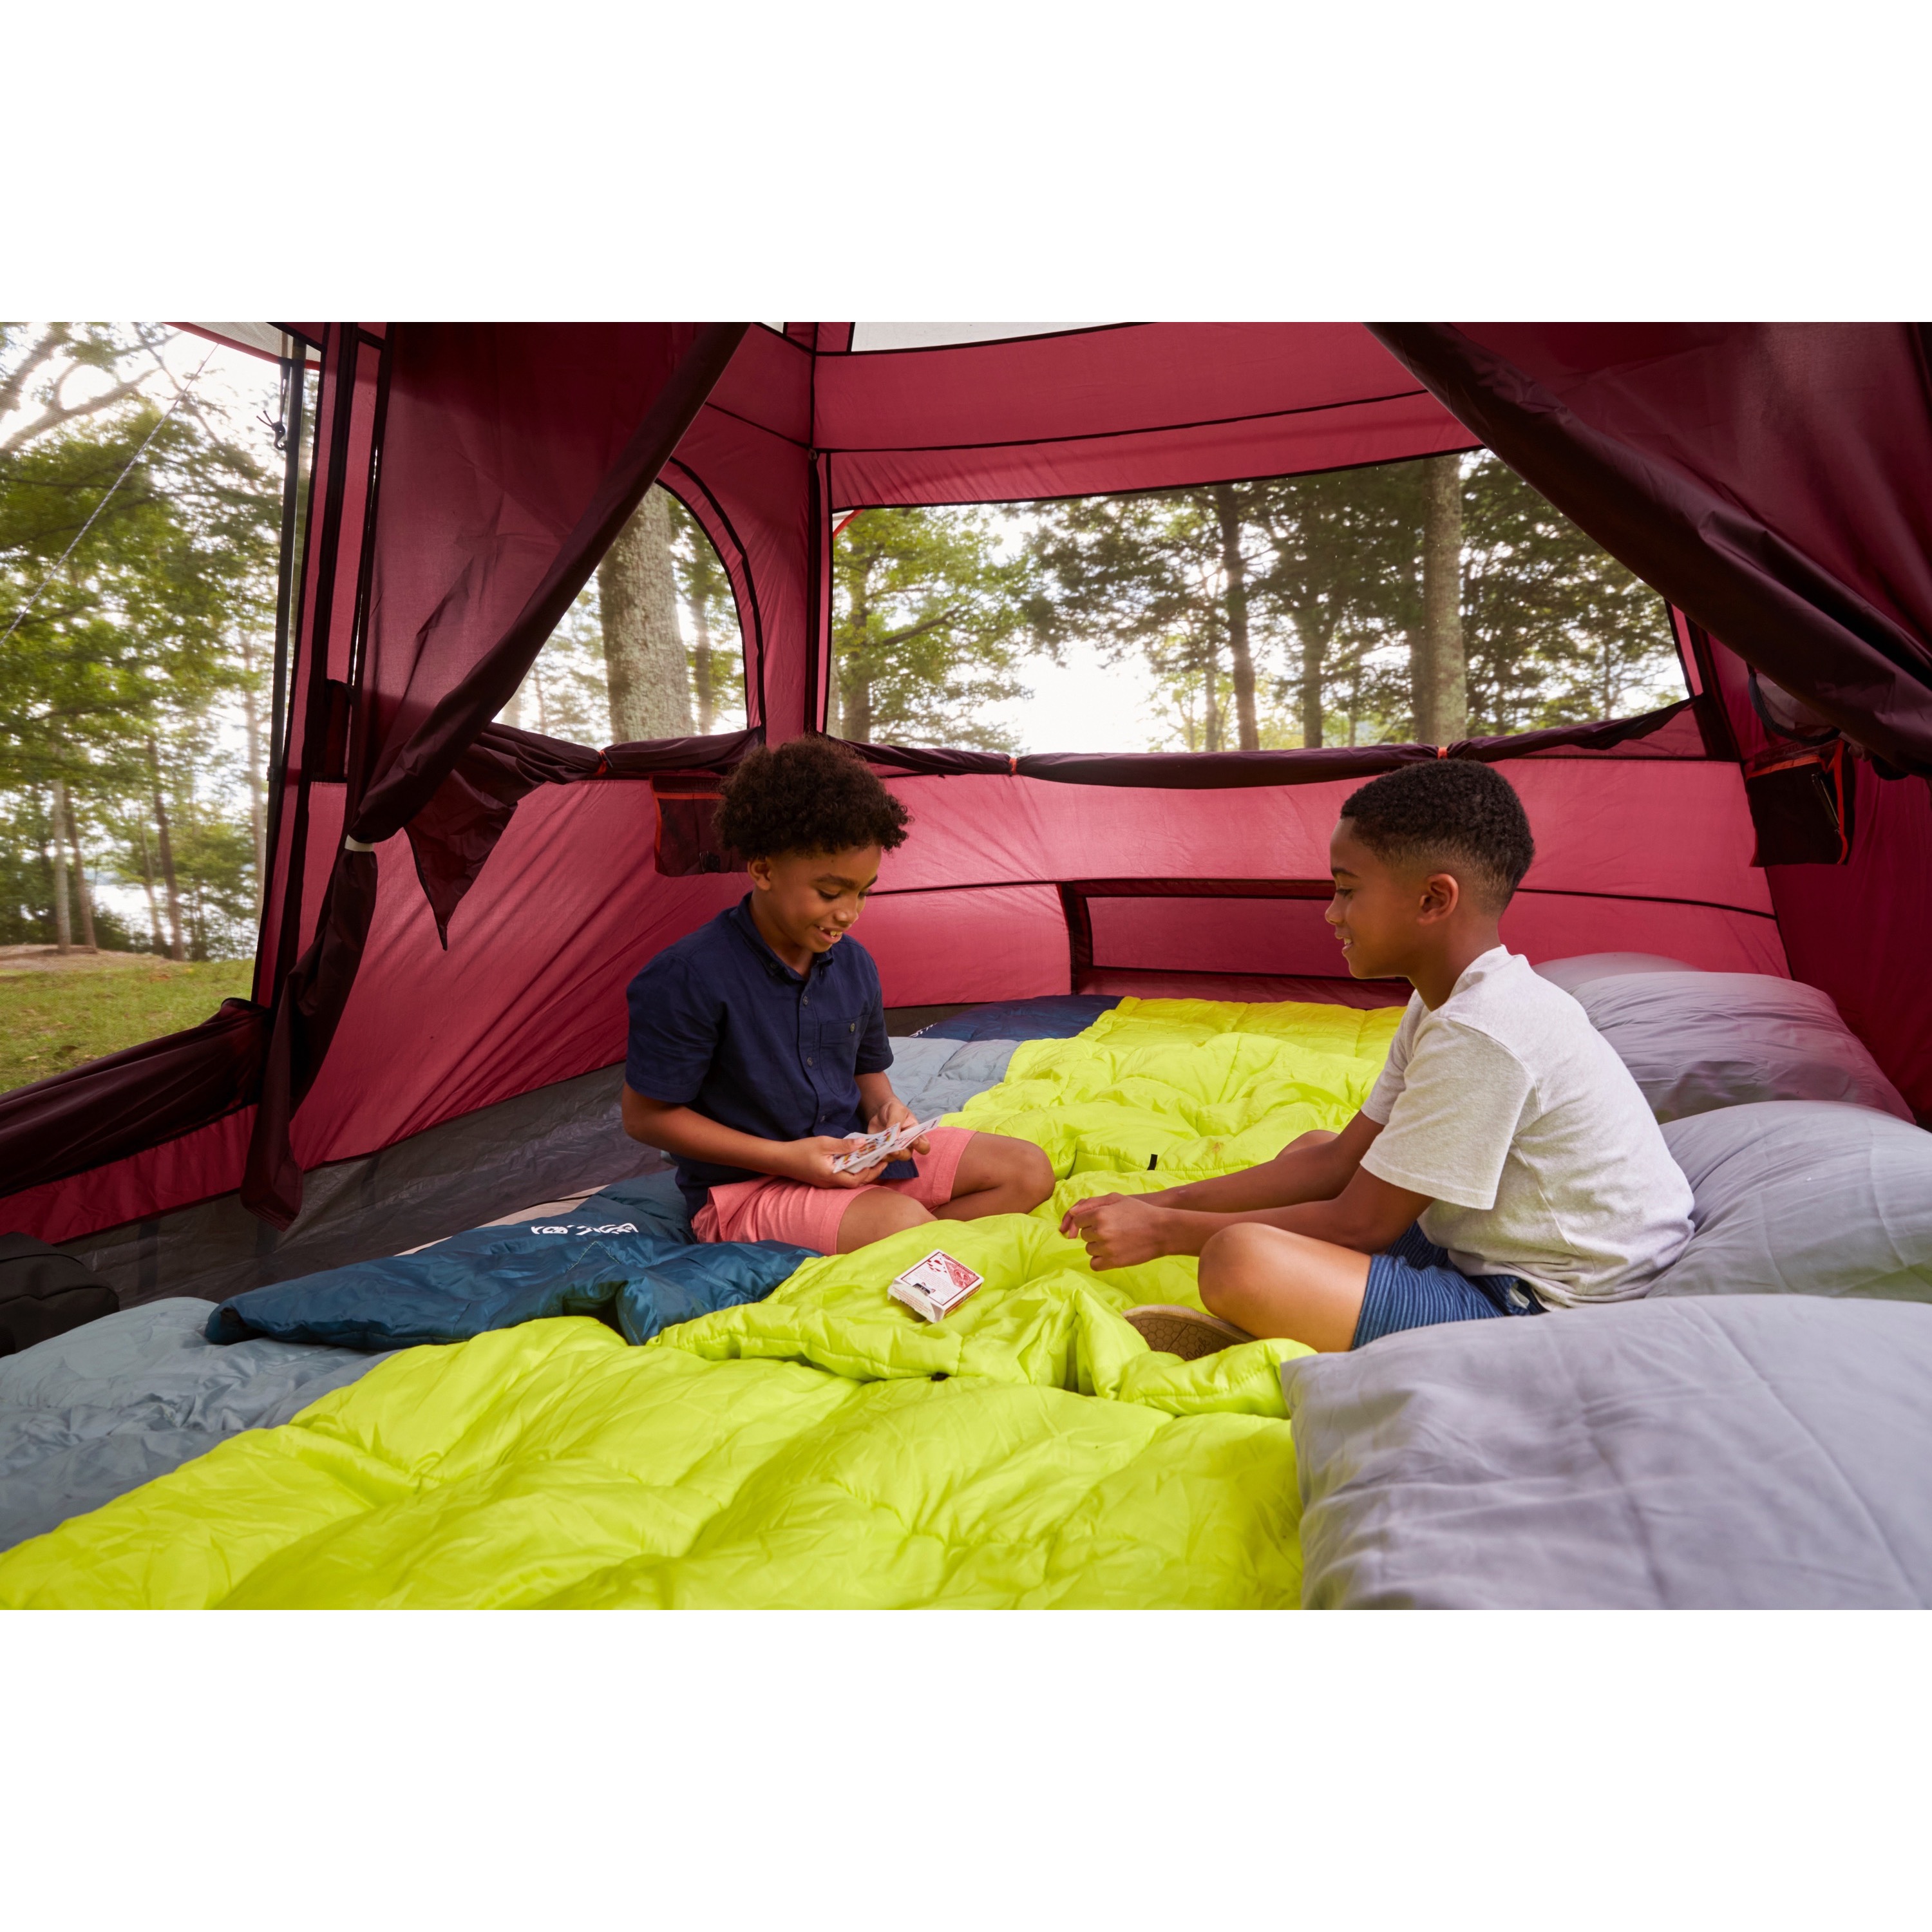 Coleman 8-Person Camping Tent - image 3 of 9